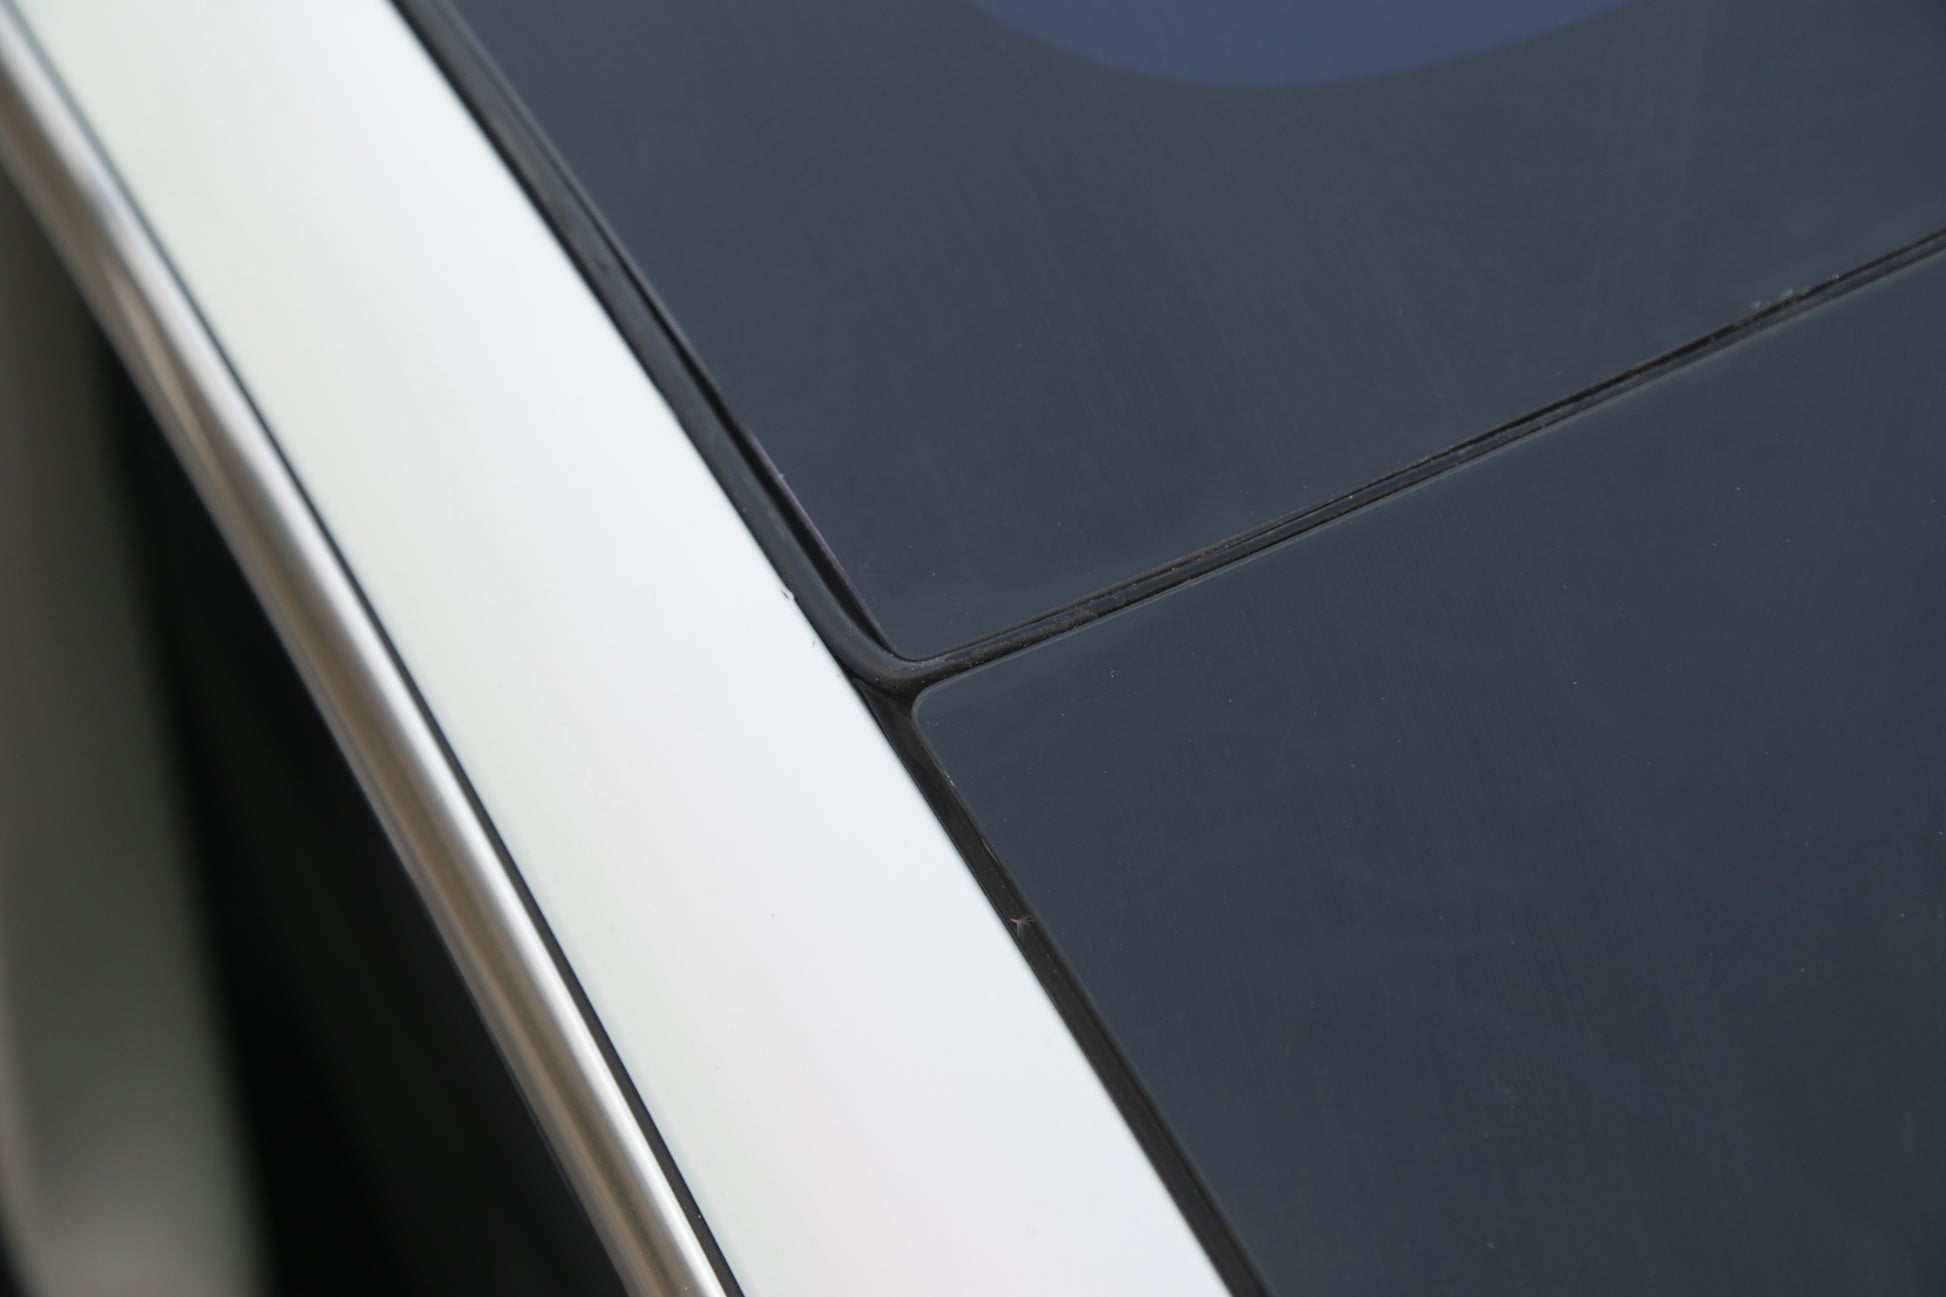 Model 3: Roof Noise Reduction Rubber Seal Stripe